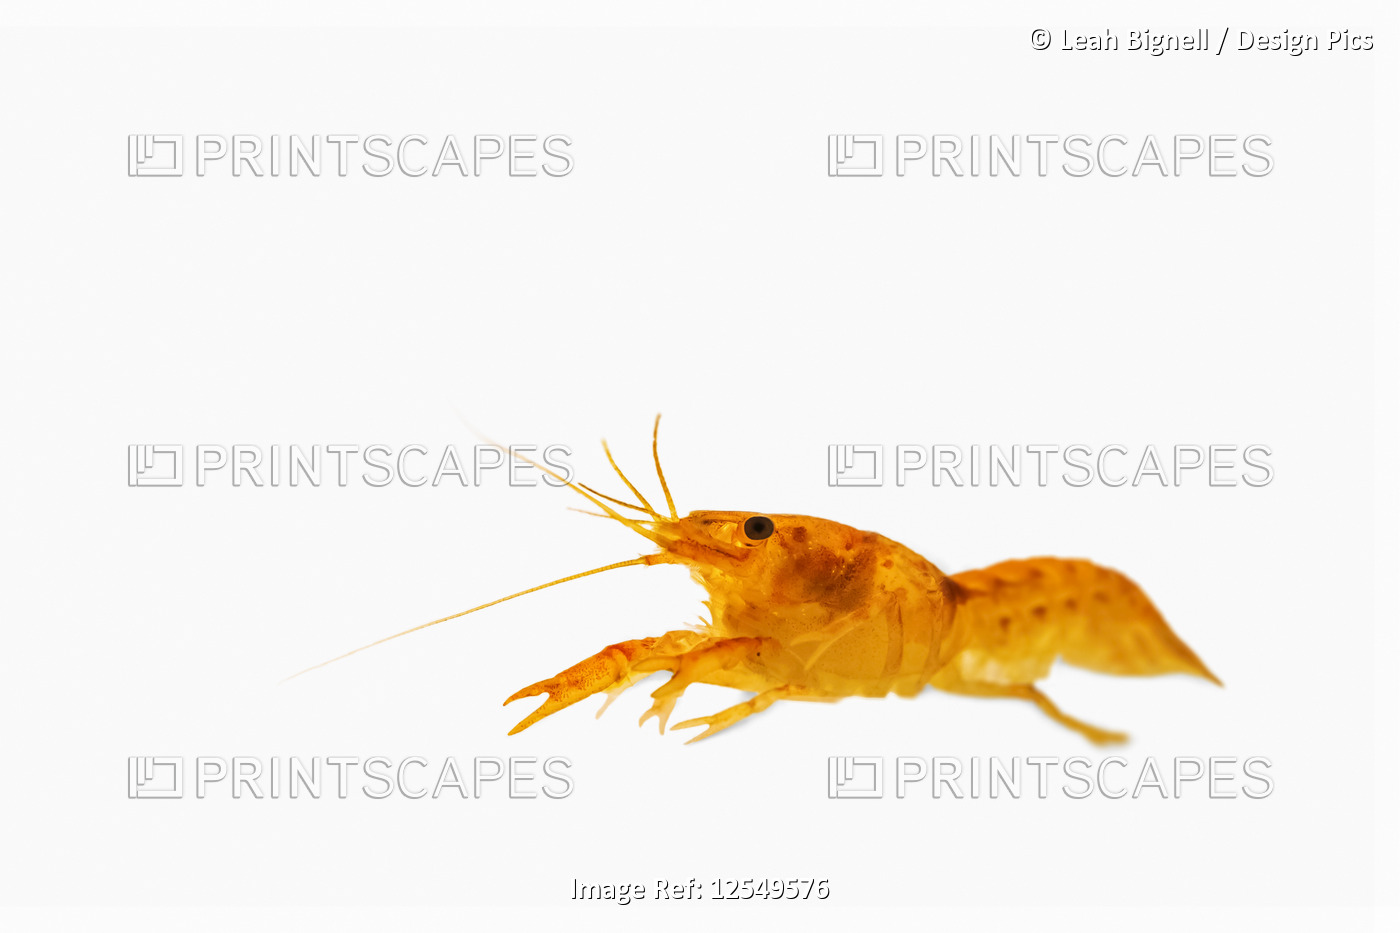 Mexican Dwarf Crayfish on a white background